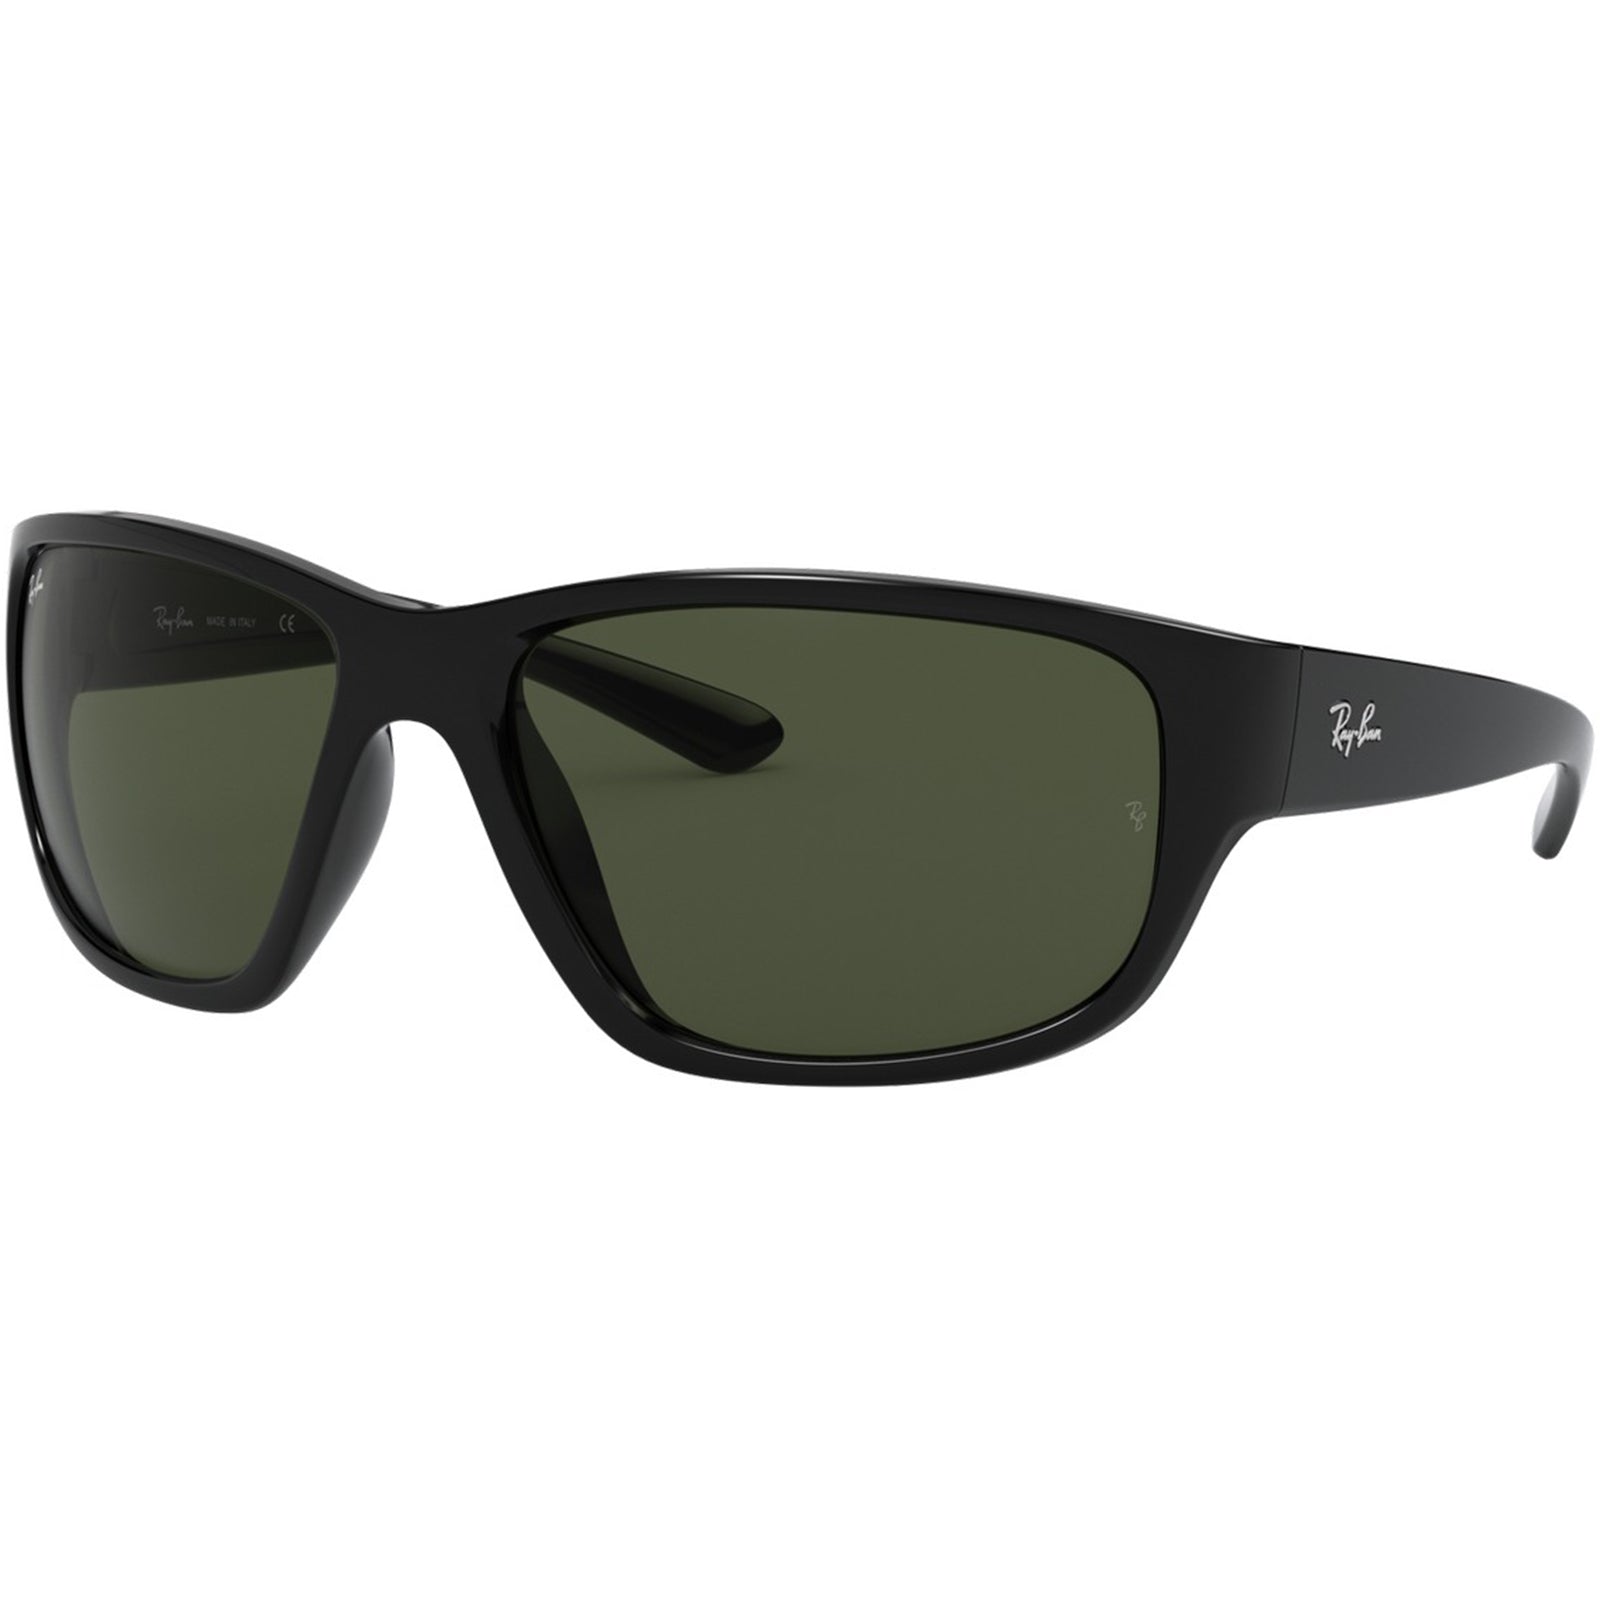 Ray-Ban RB4300 Men's Lifestyle Sunglasses-0RB4300